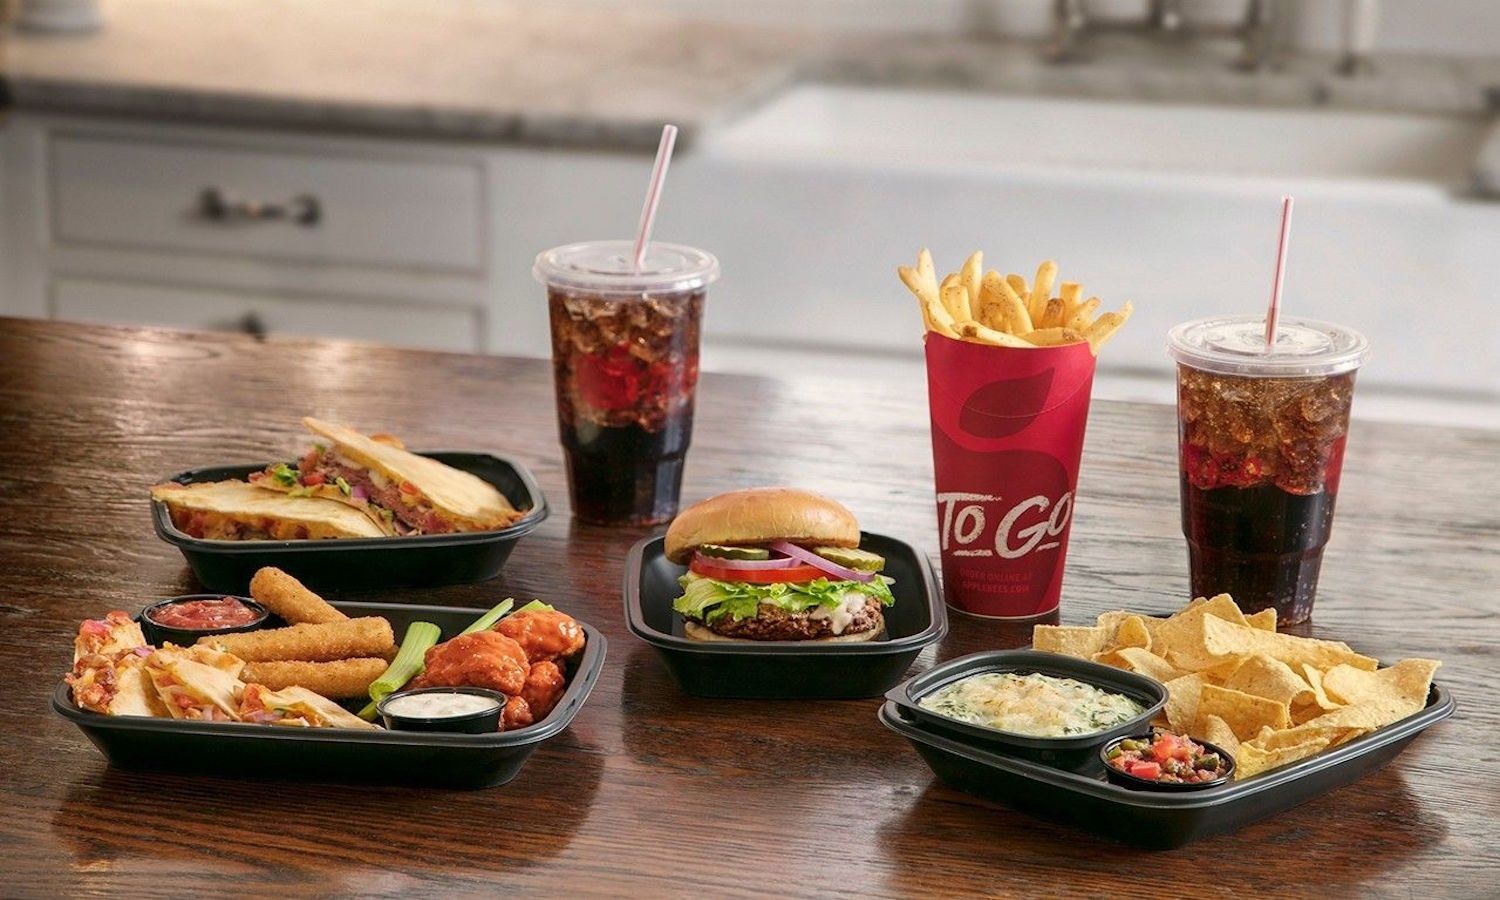 Applebee’s Takeout Near You in Colorado Springs